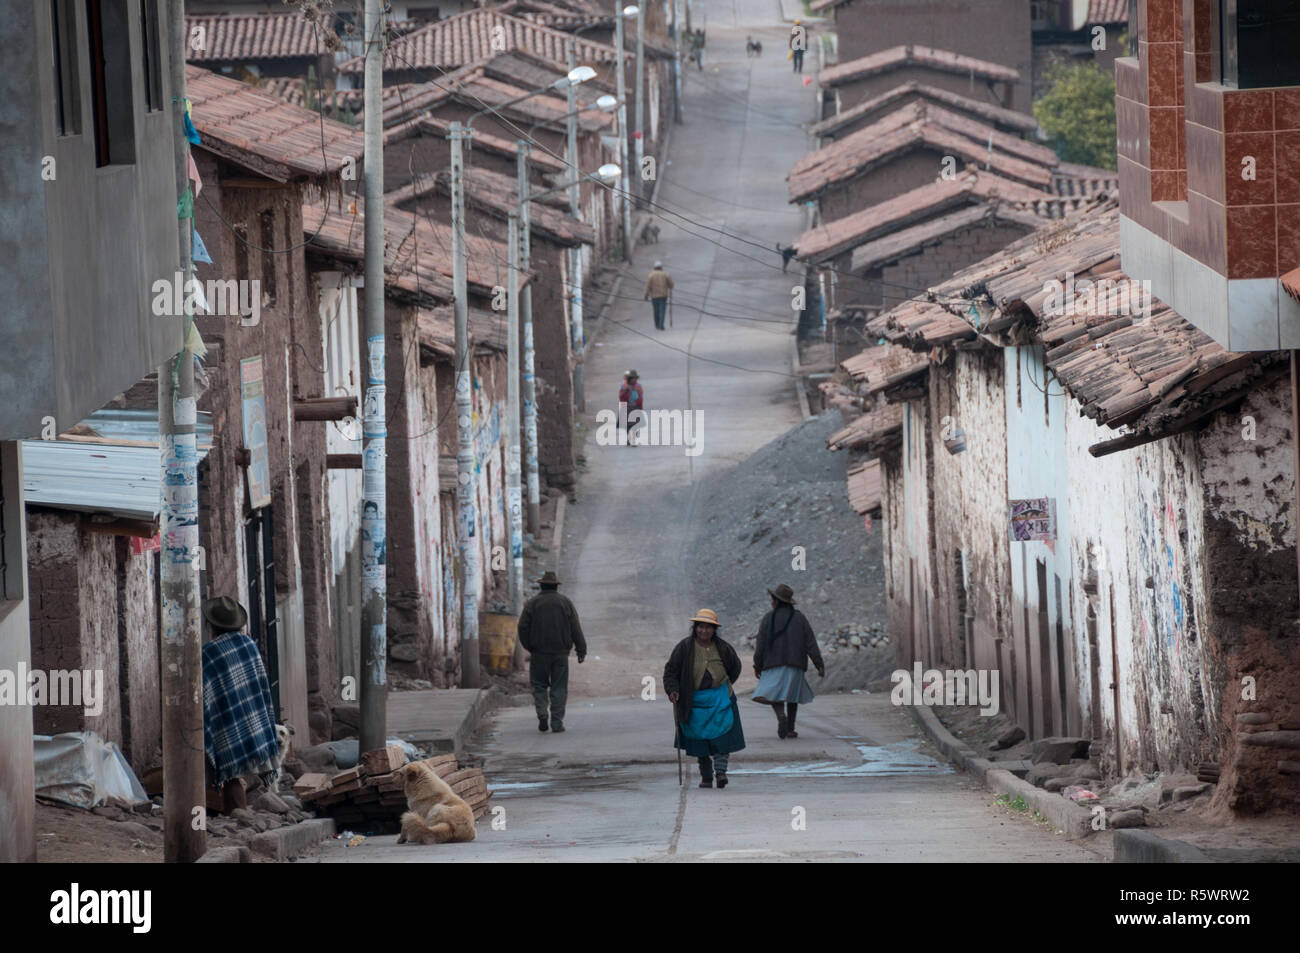 Yaurisque, Peru - August 15 2011: The streets of a very poor town in ...